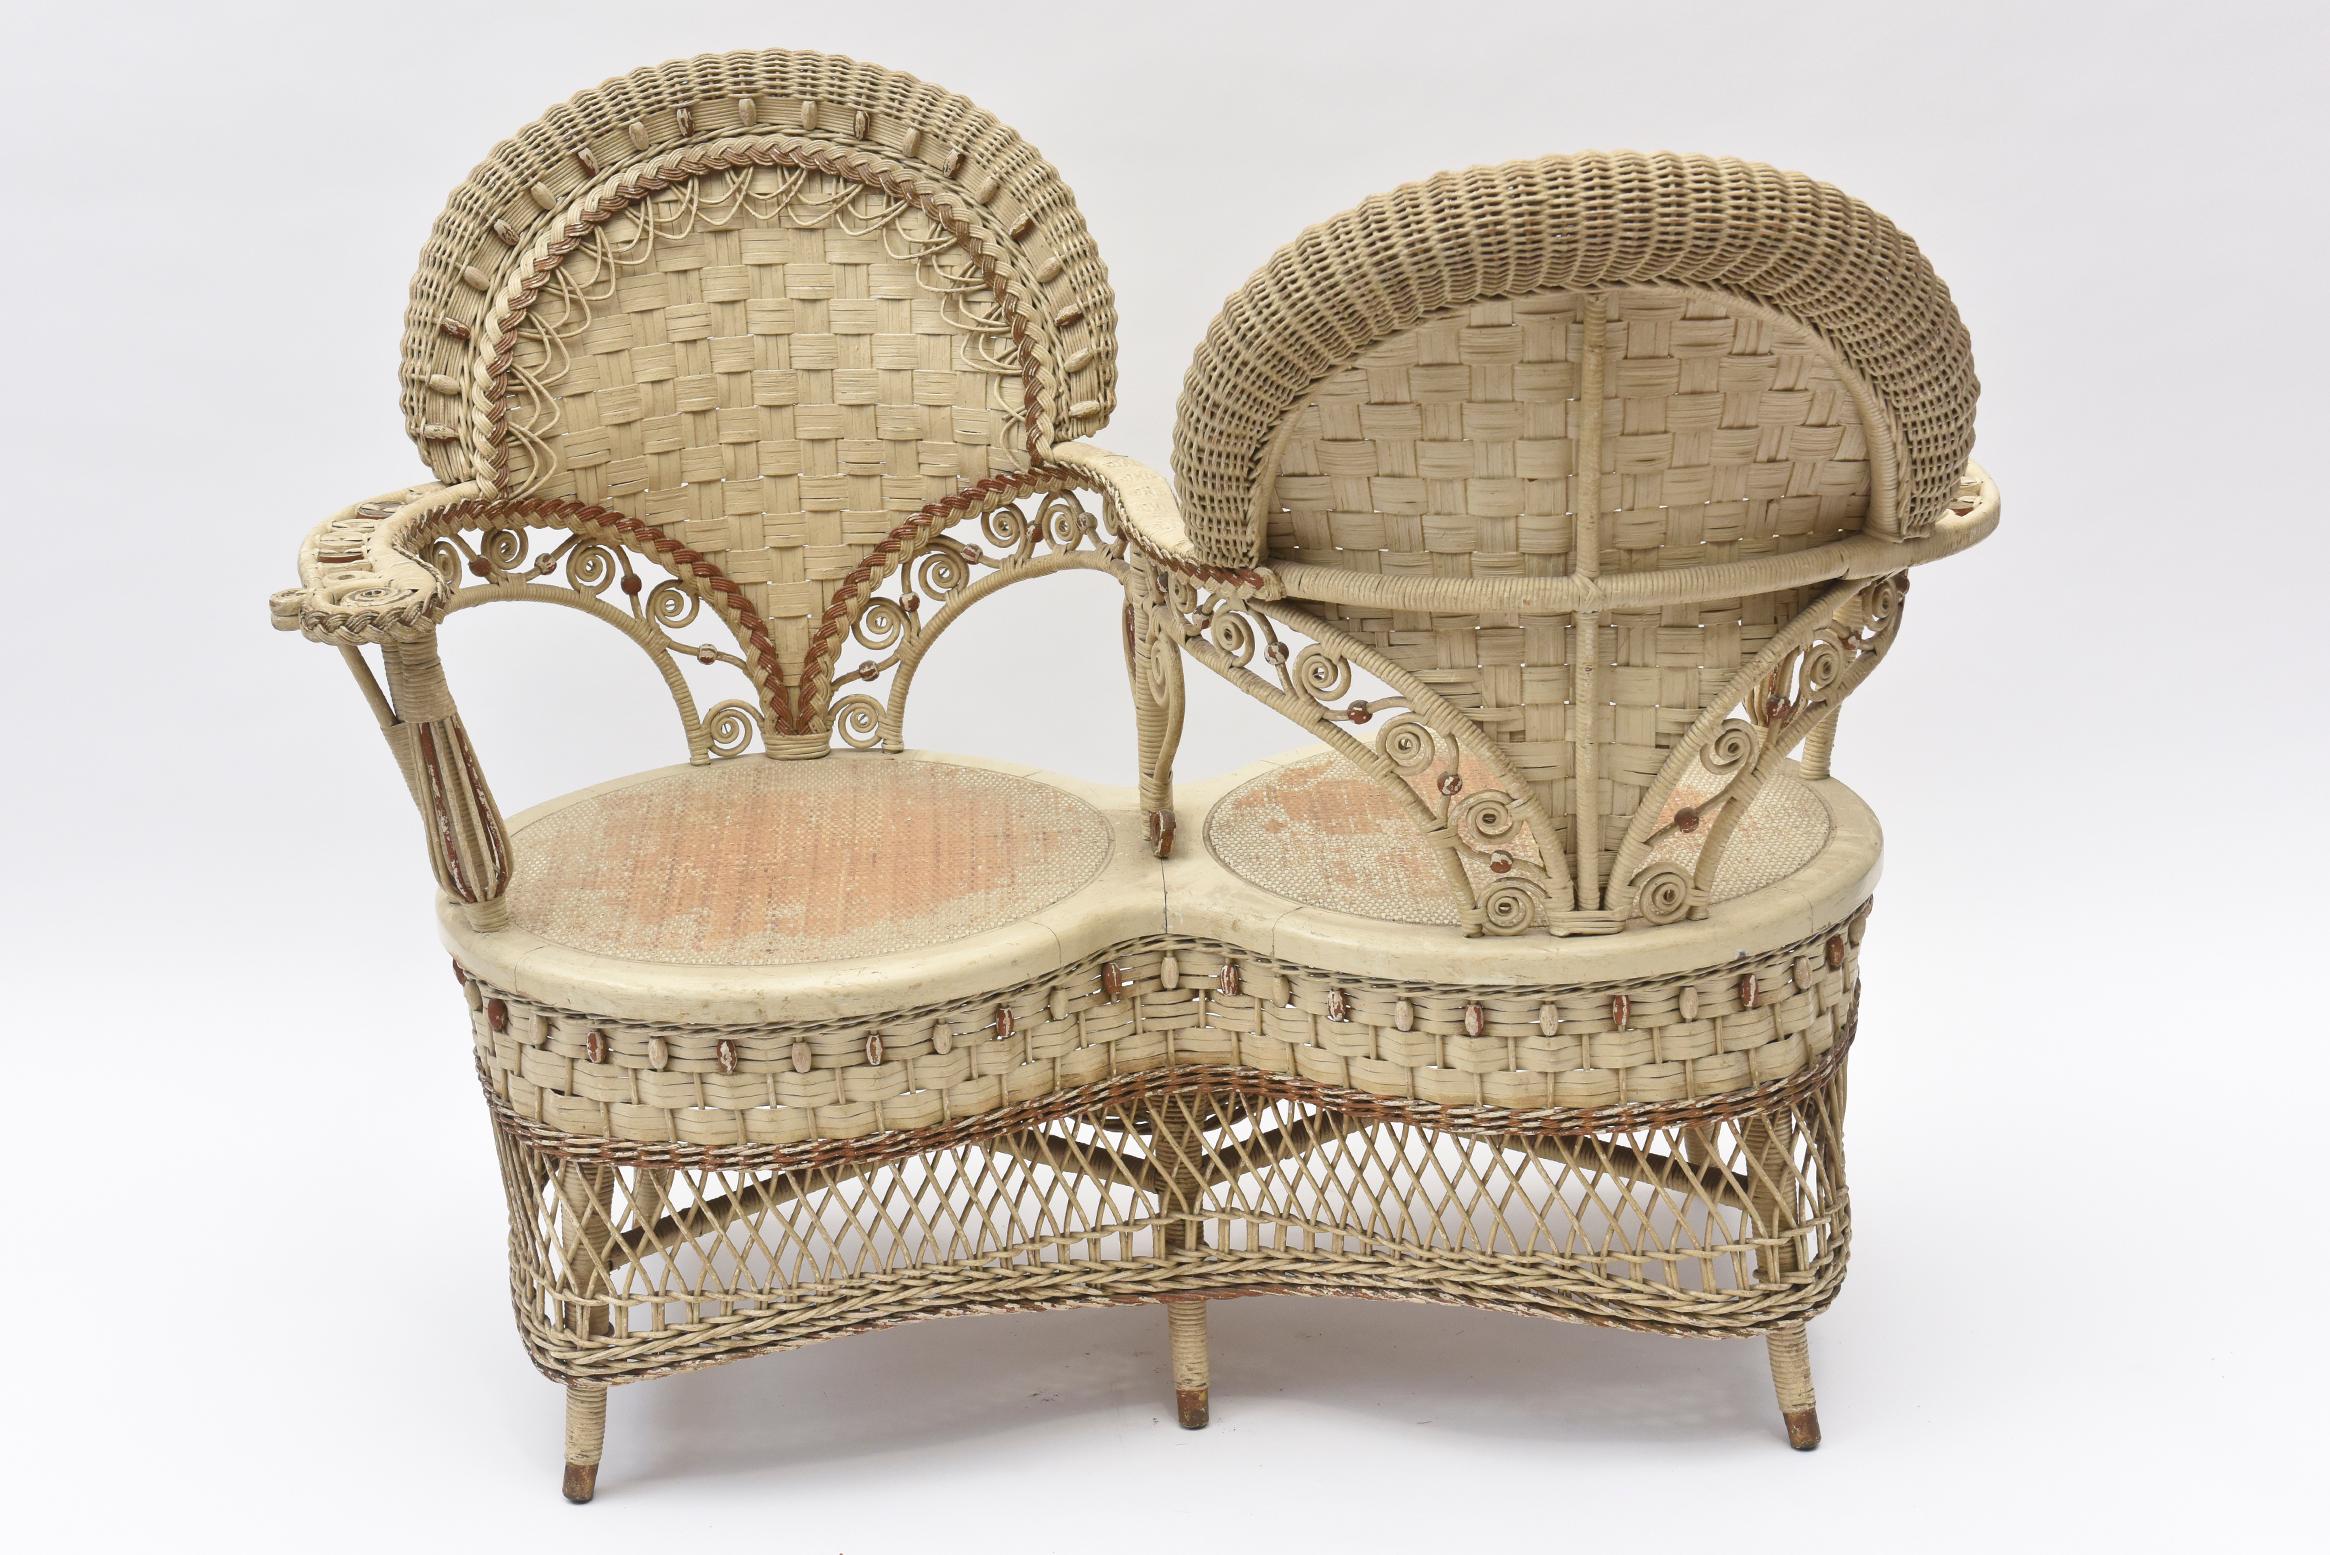 Perhaps the Rarest of all Victorian Wicker pieces, this parlor chair was used for Ladies to gossip while not facing one another or to limit contact between courting couples. Victorian to its extreme, it has curlicues, a woven beaded apron with open